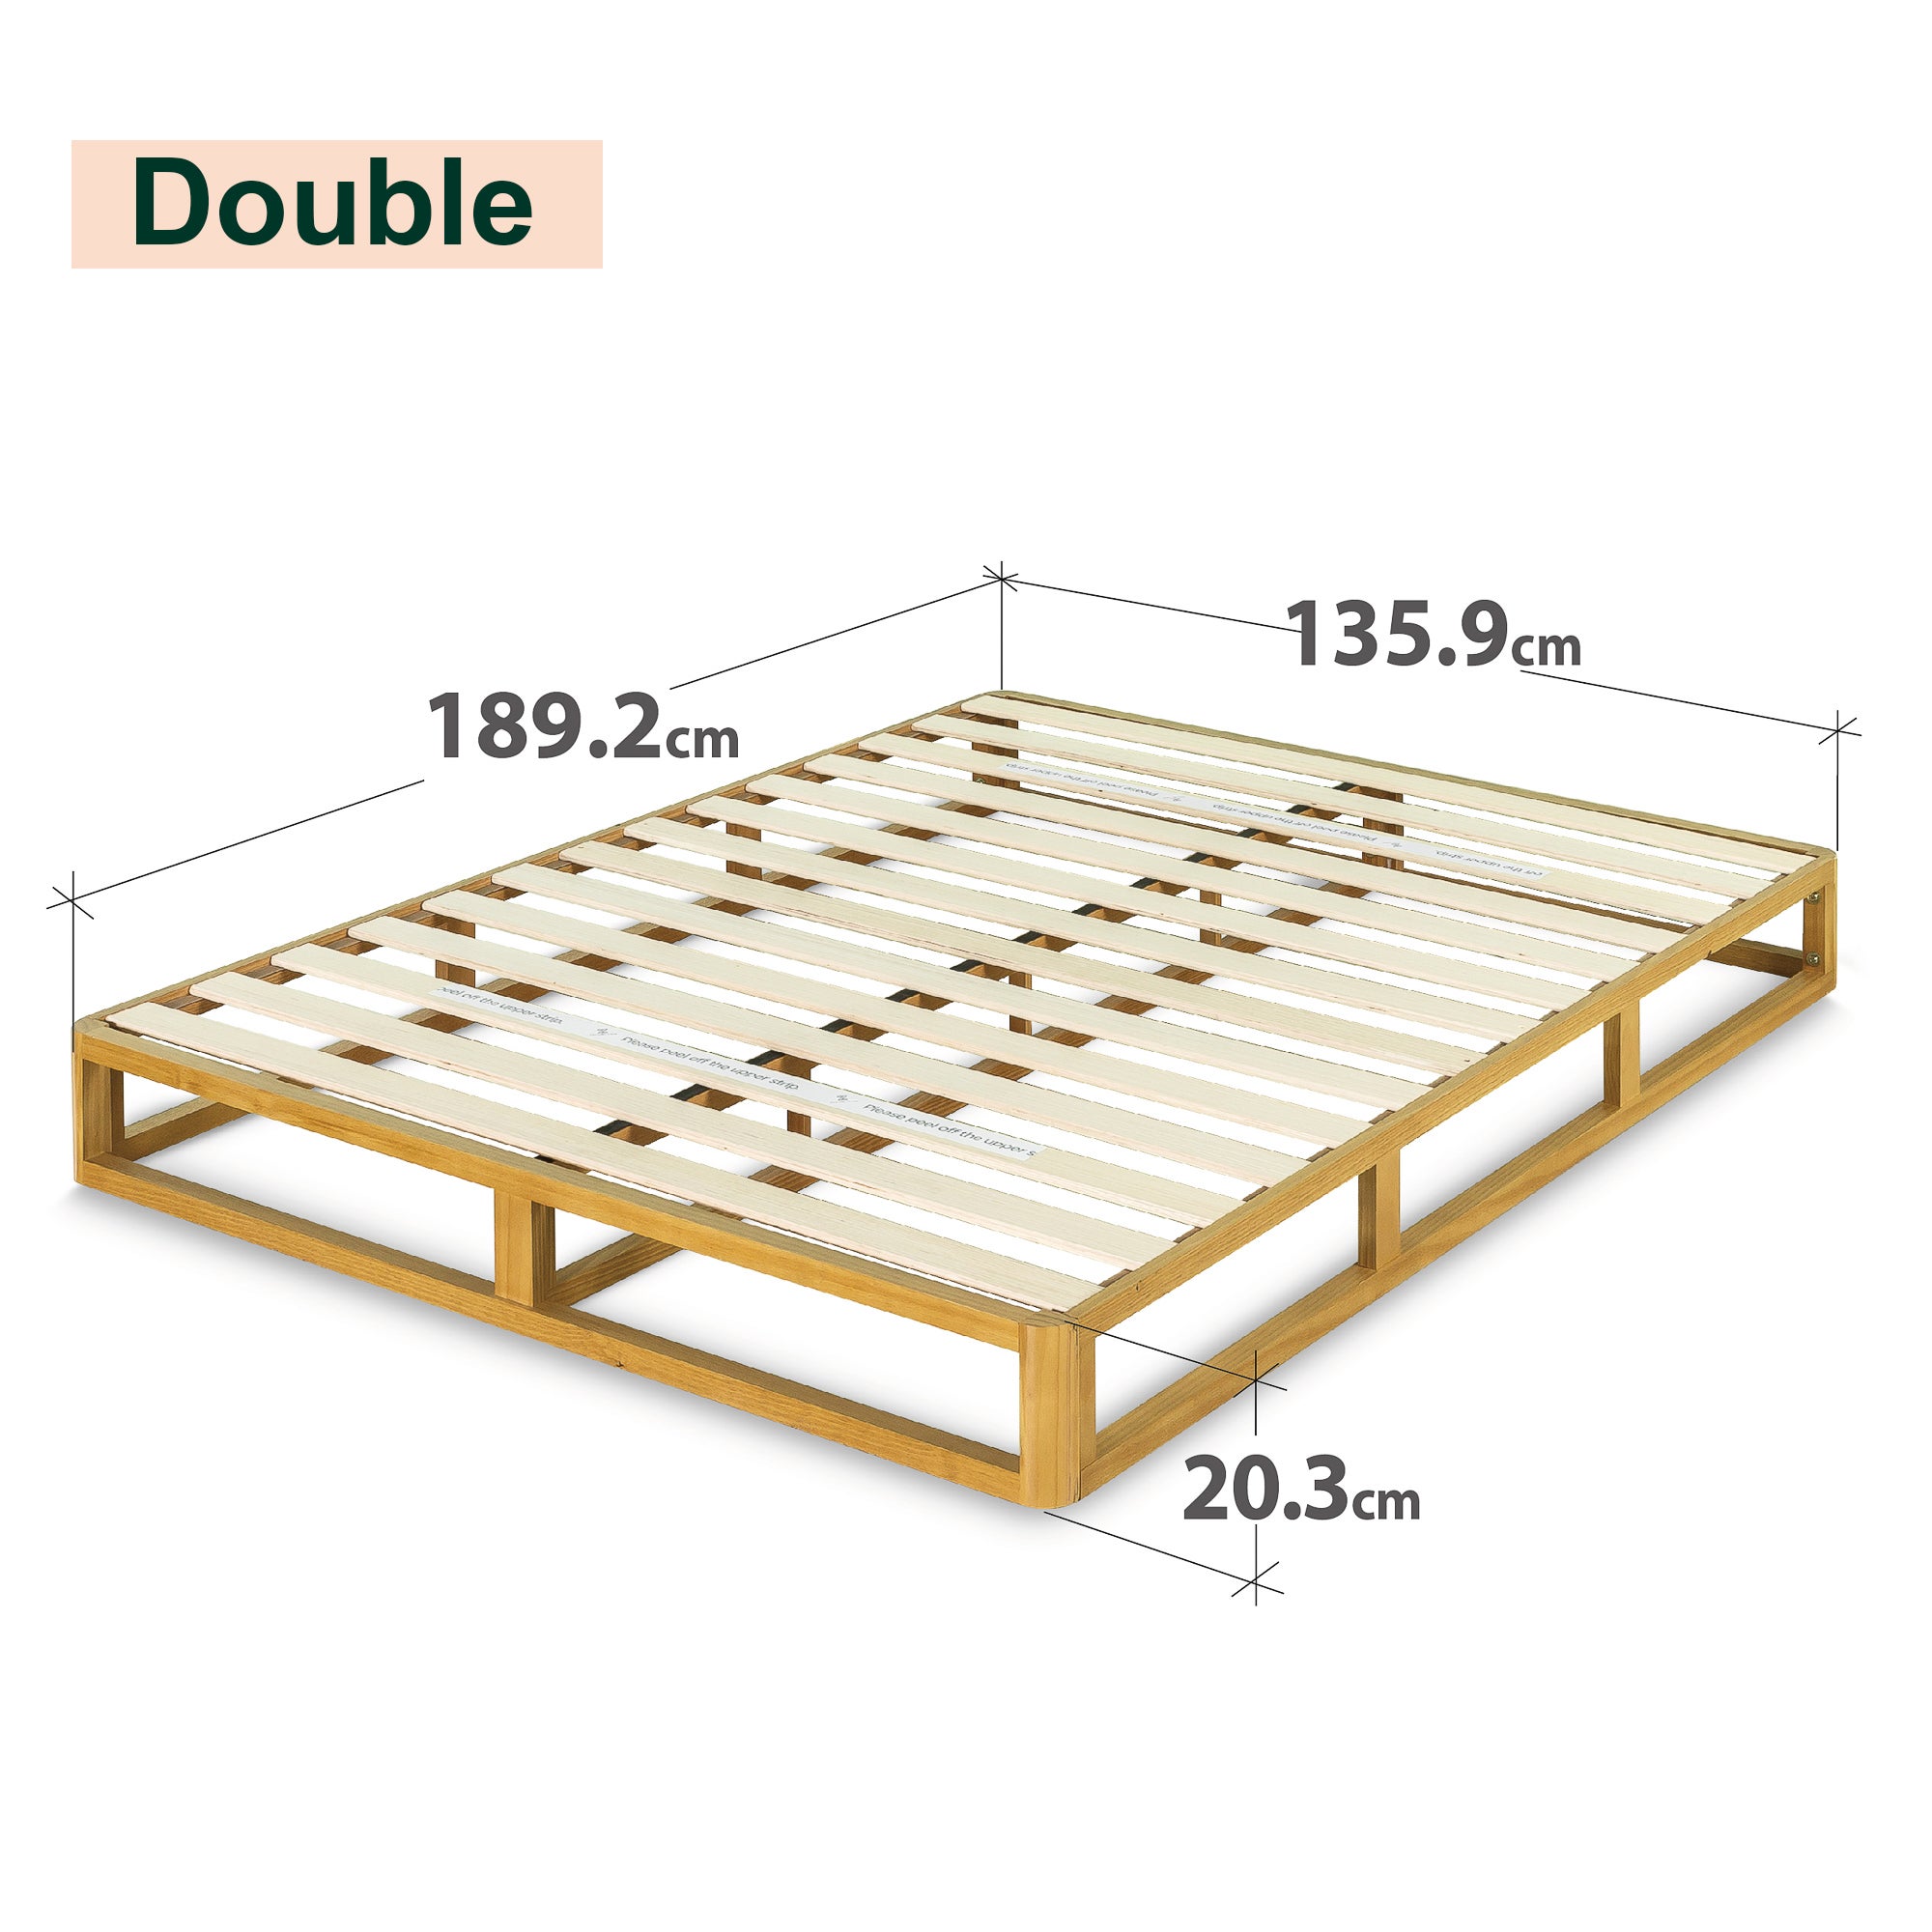 Zinus Industrial Pine Wood Bed Frame Low Bed Base Mattress Foundation Natural 20cm Double 